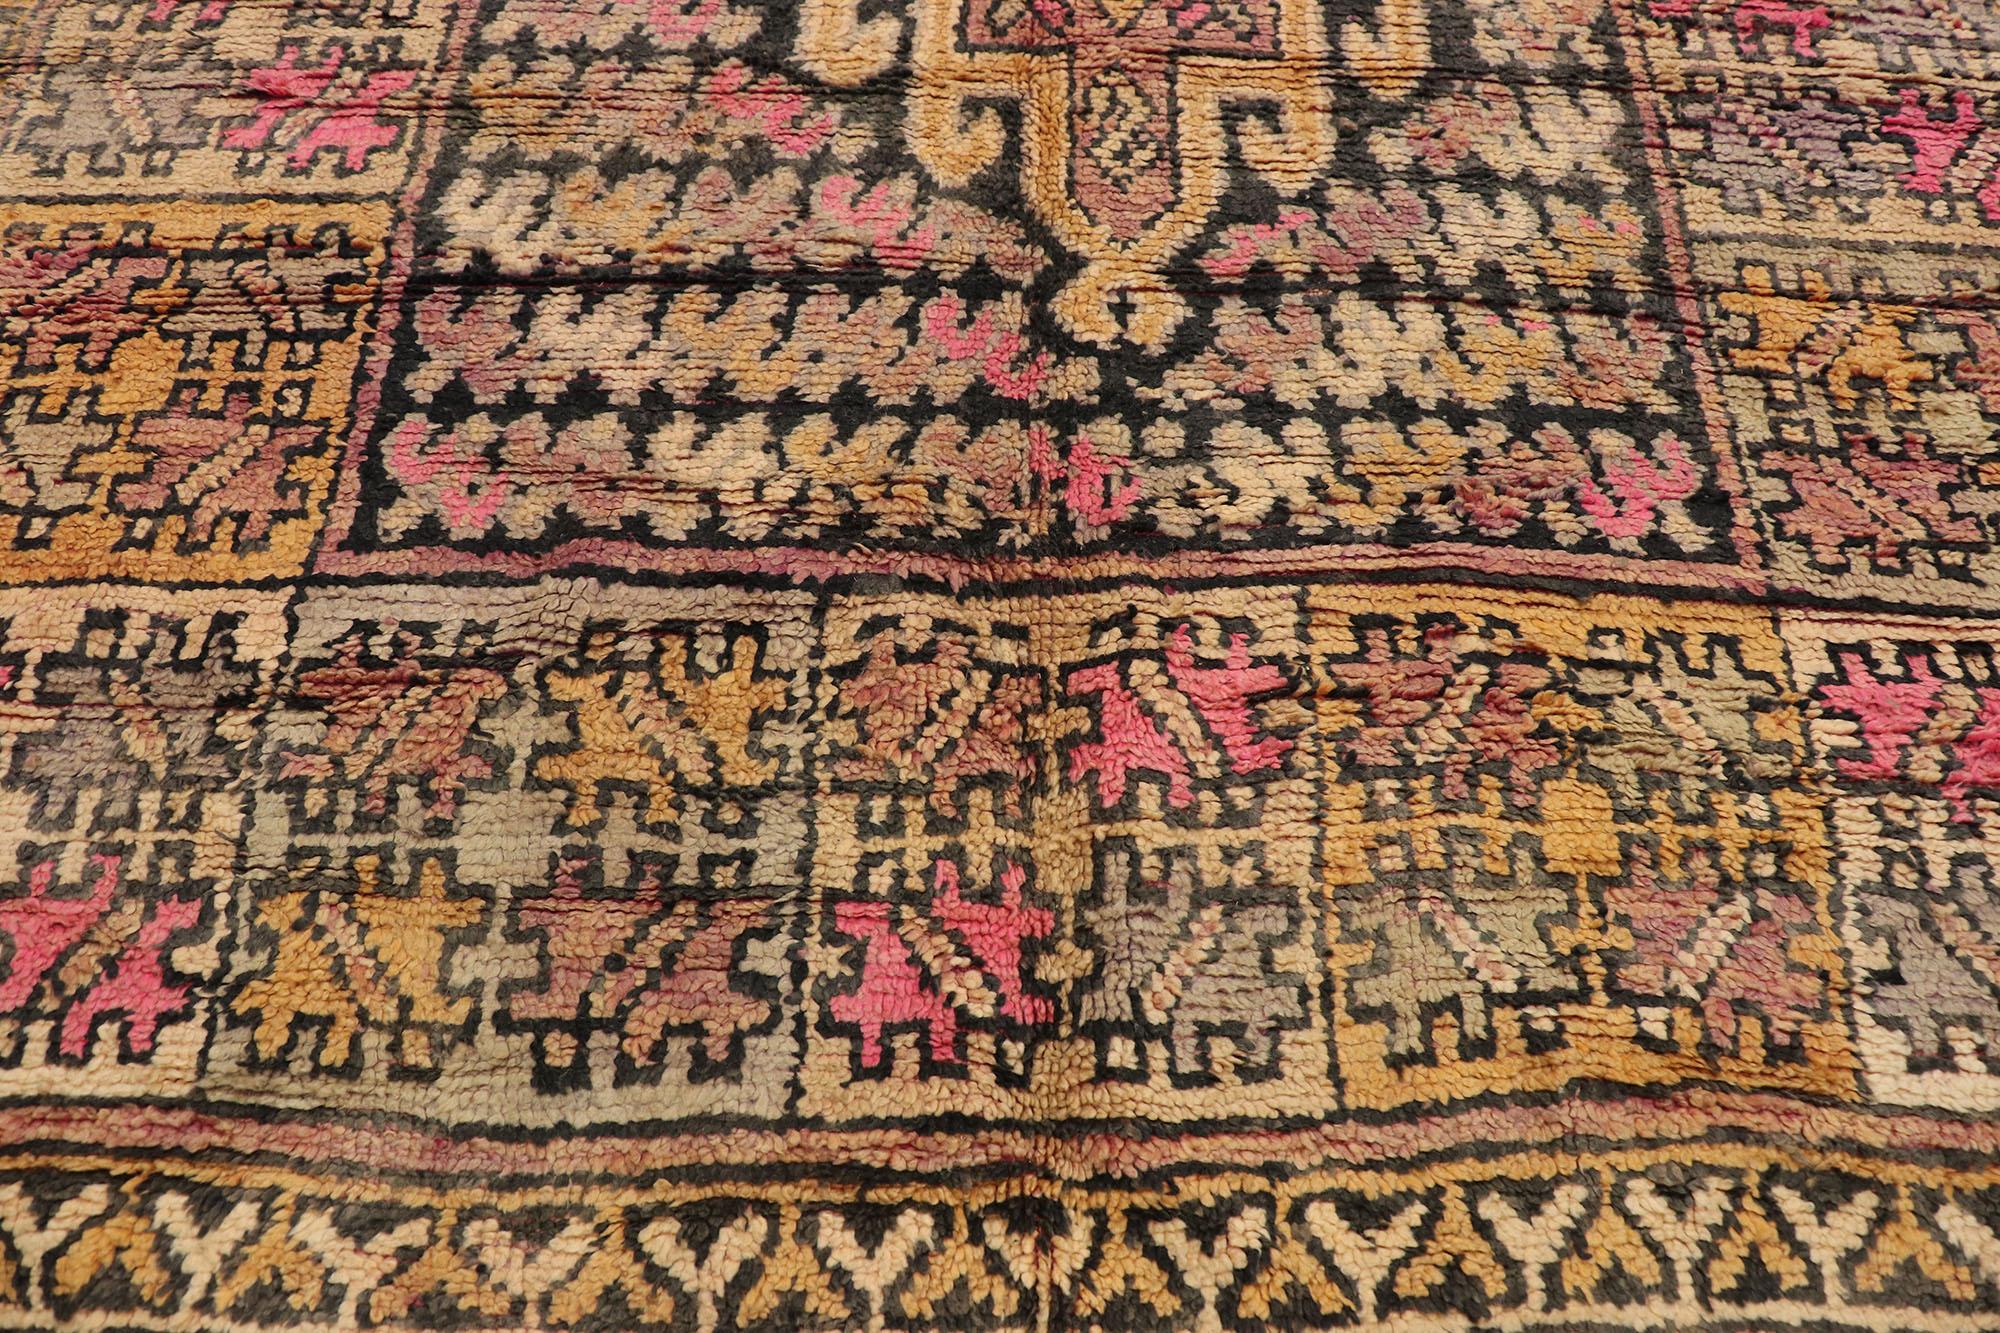 Vintage Berber Boujad Moroccan Rug with Bohemian Style In Good Condition For Sale In Dallas, TX